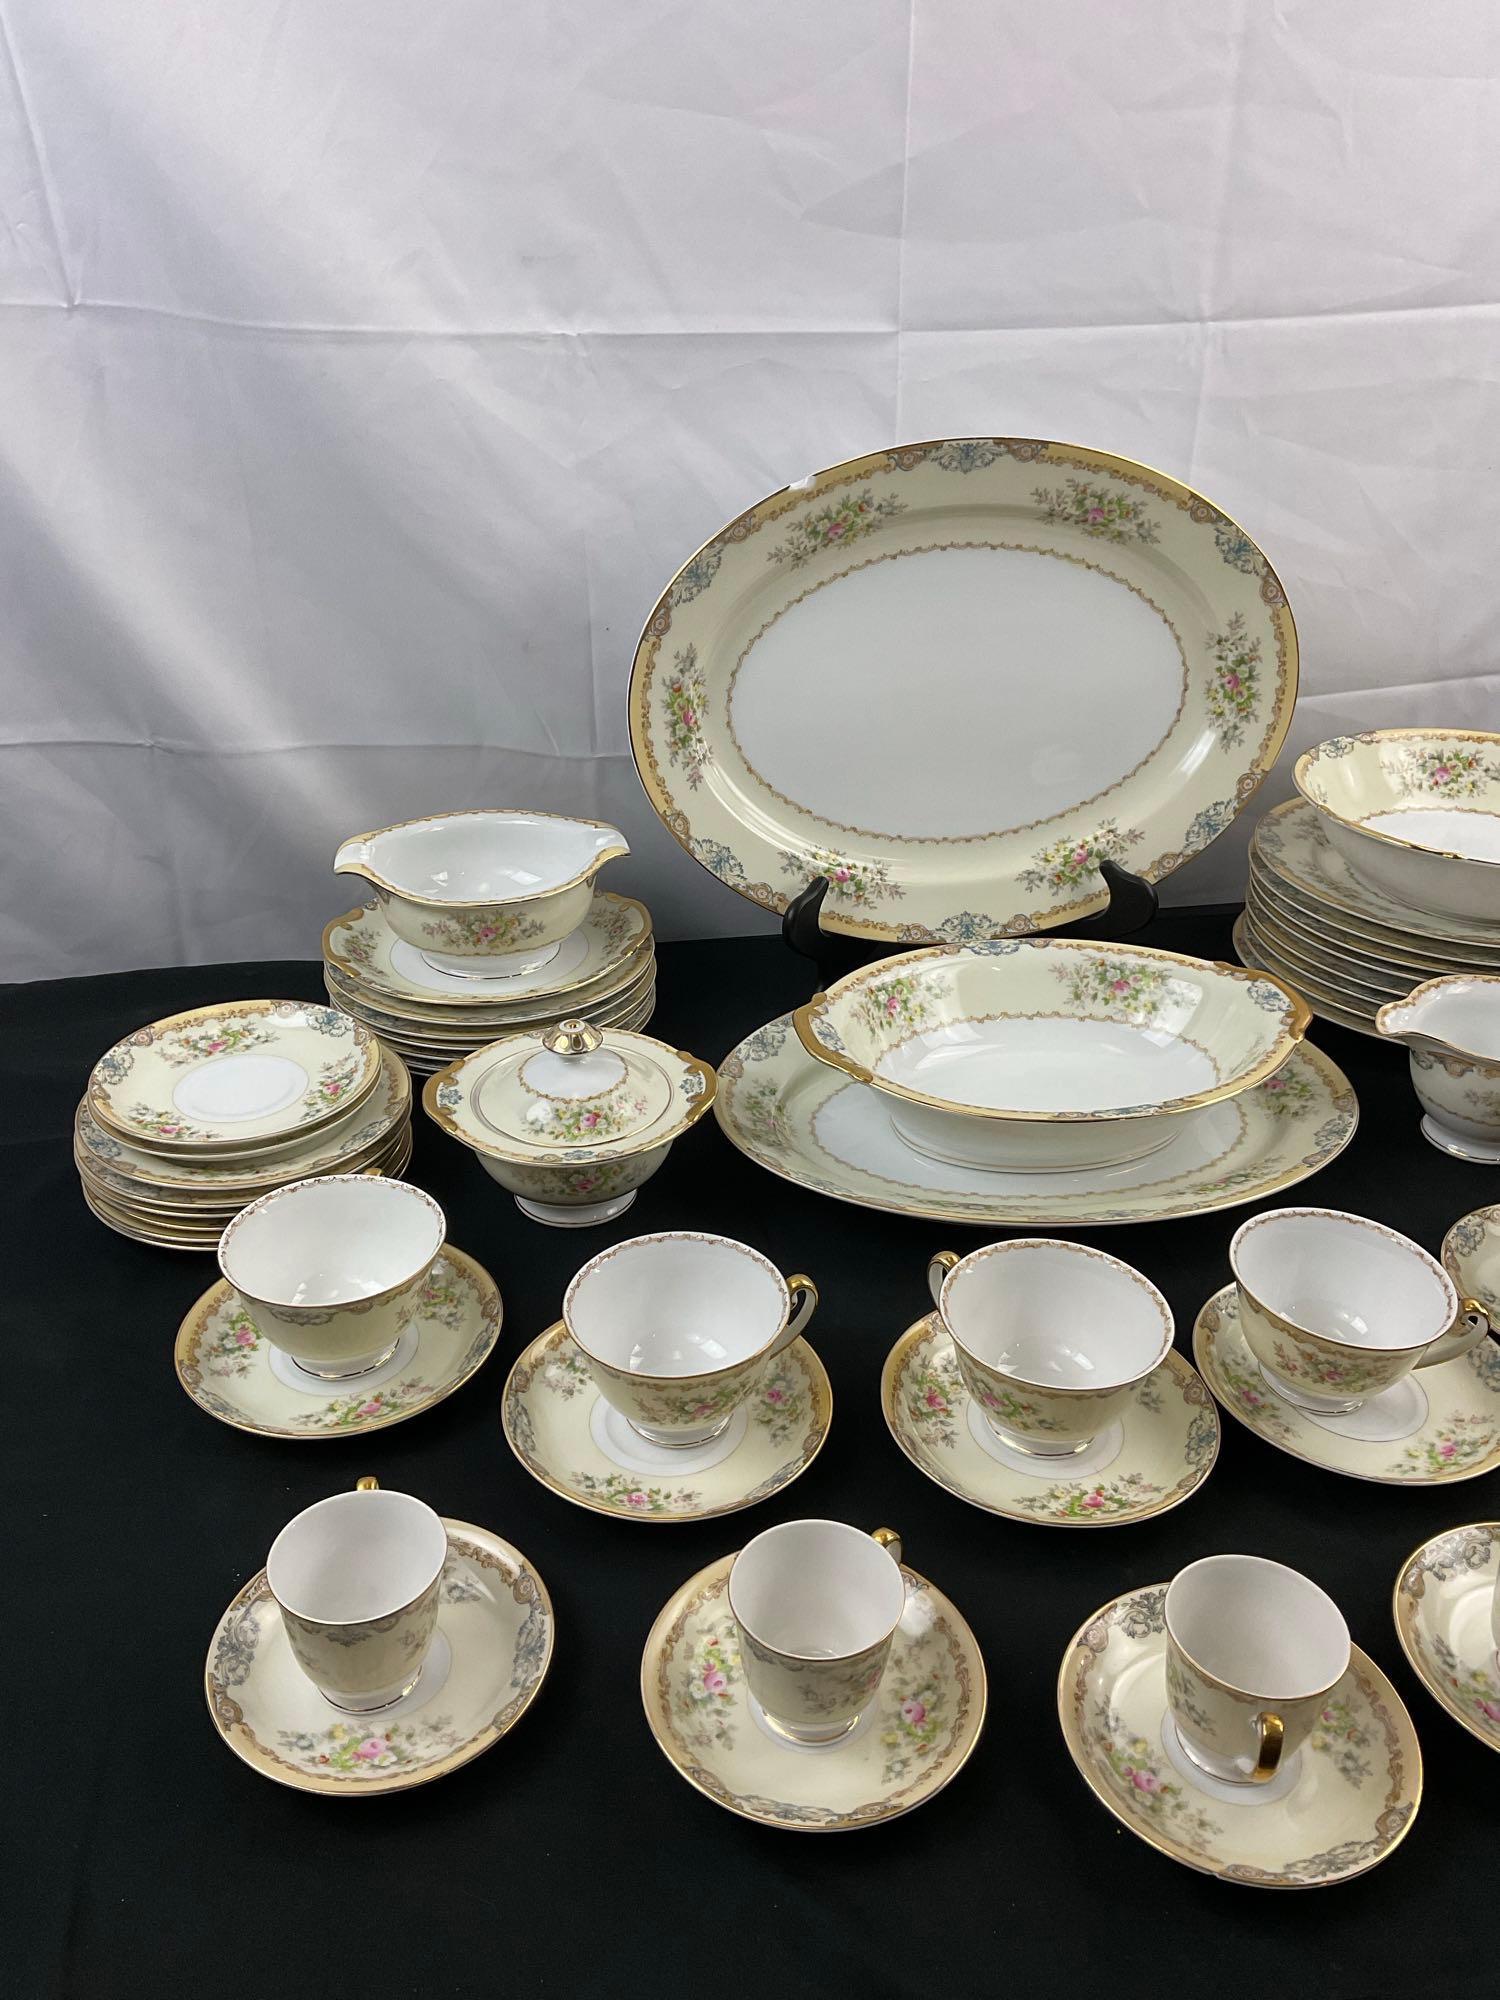 53 pcs Vintage Meito China Made in Japan Hand Painted Dinner Set in Cream Floral Diana Pattern. See